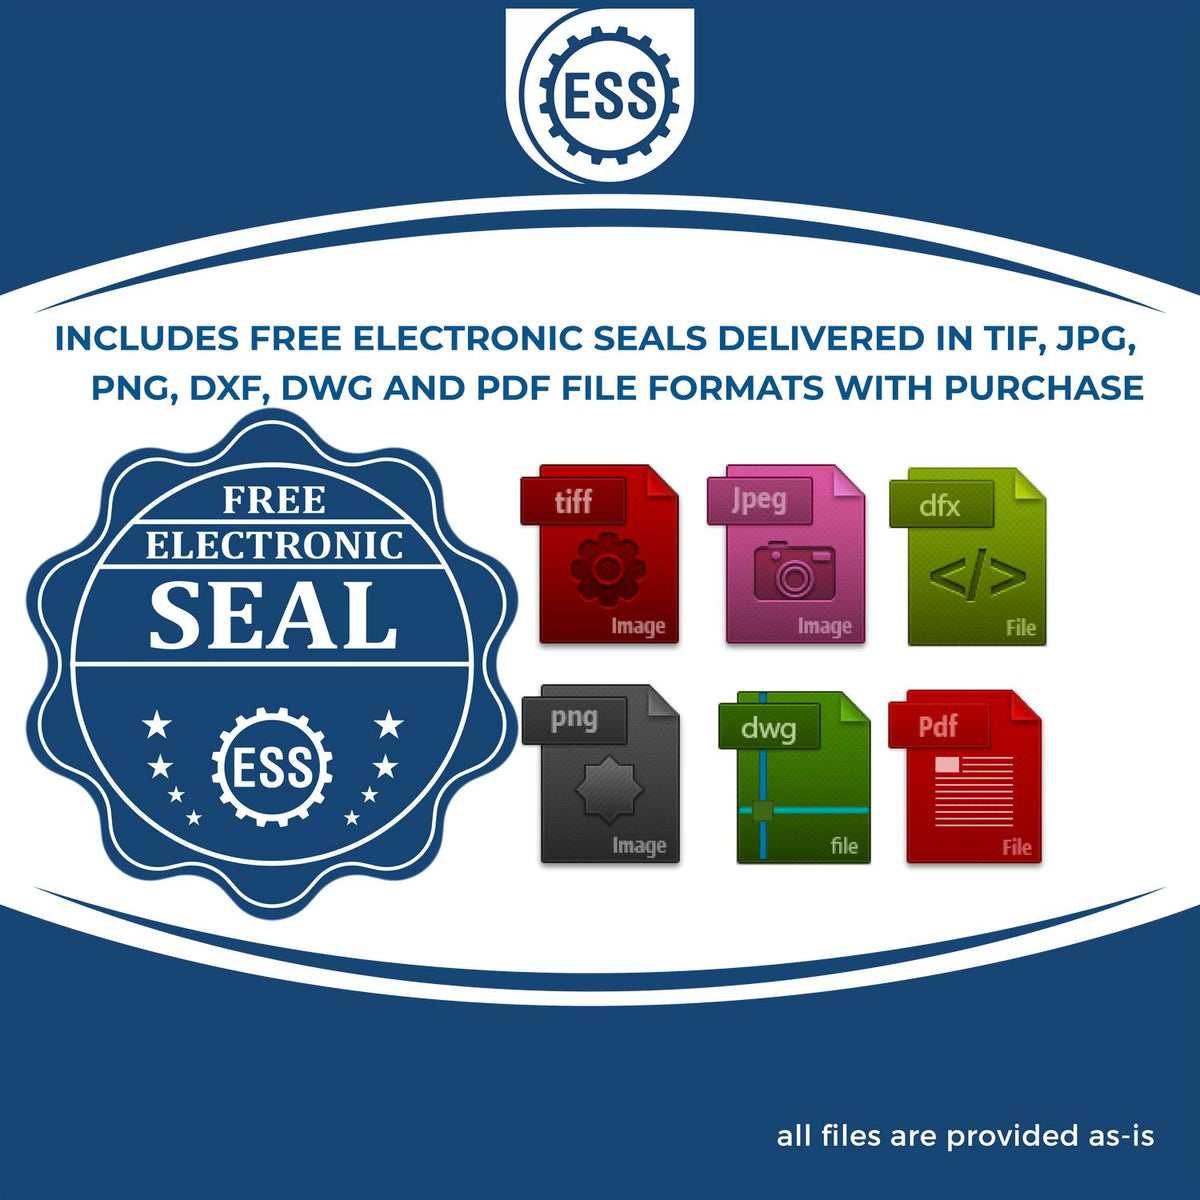 An infographic for the free electronic seal for the Handheld Louisiana Land Surveyor Seal illustrating the different file type icons such as DXF, DWG, TIF, JPG and PNG.